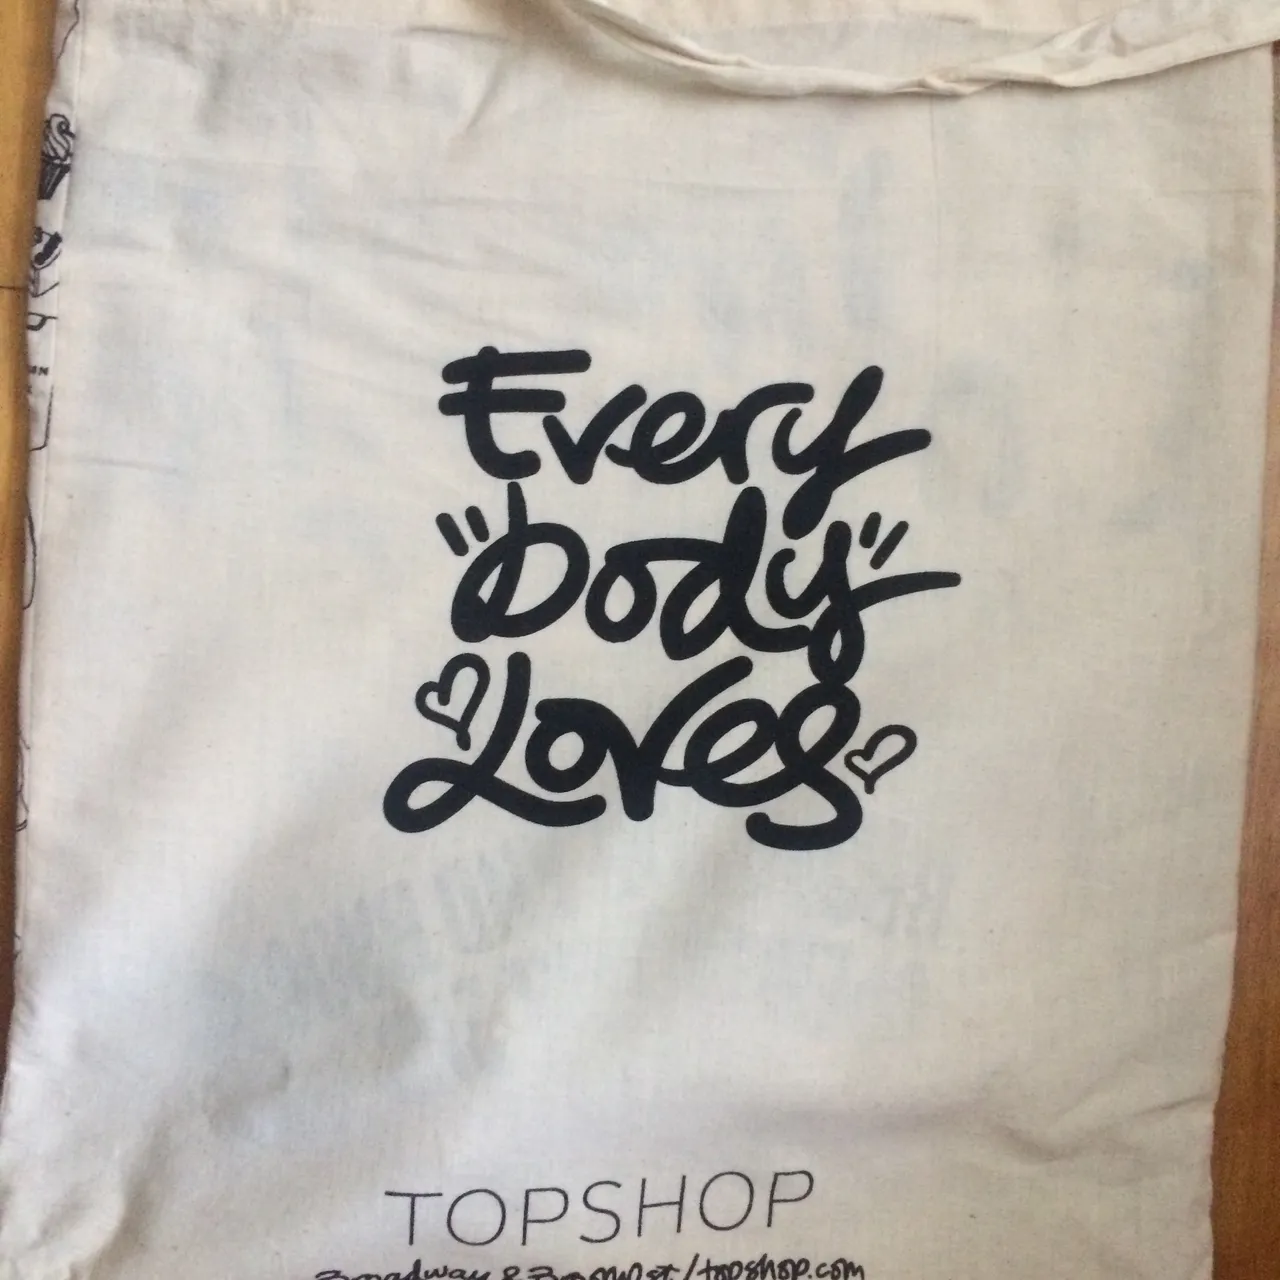 New Topshop New York limited edition totes, tank top photo 3